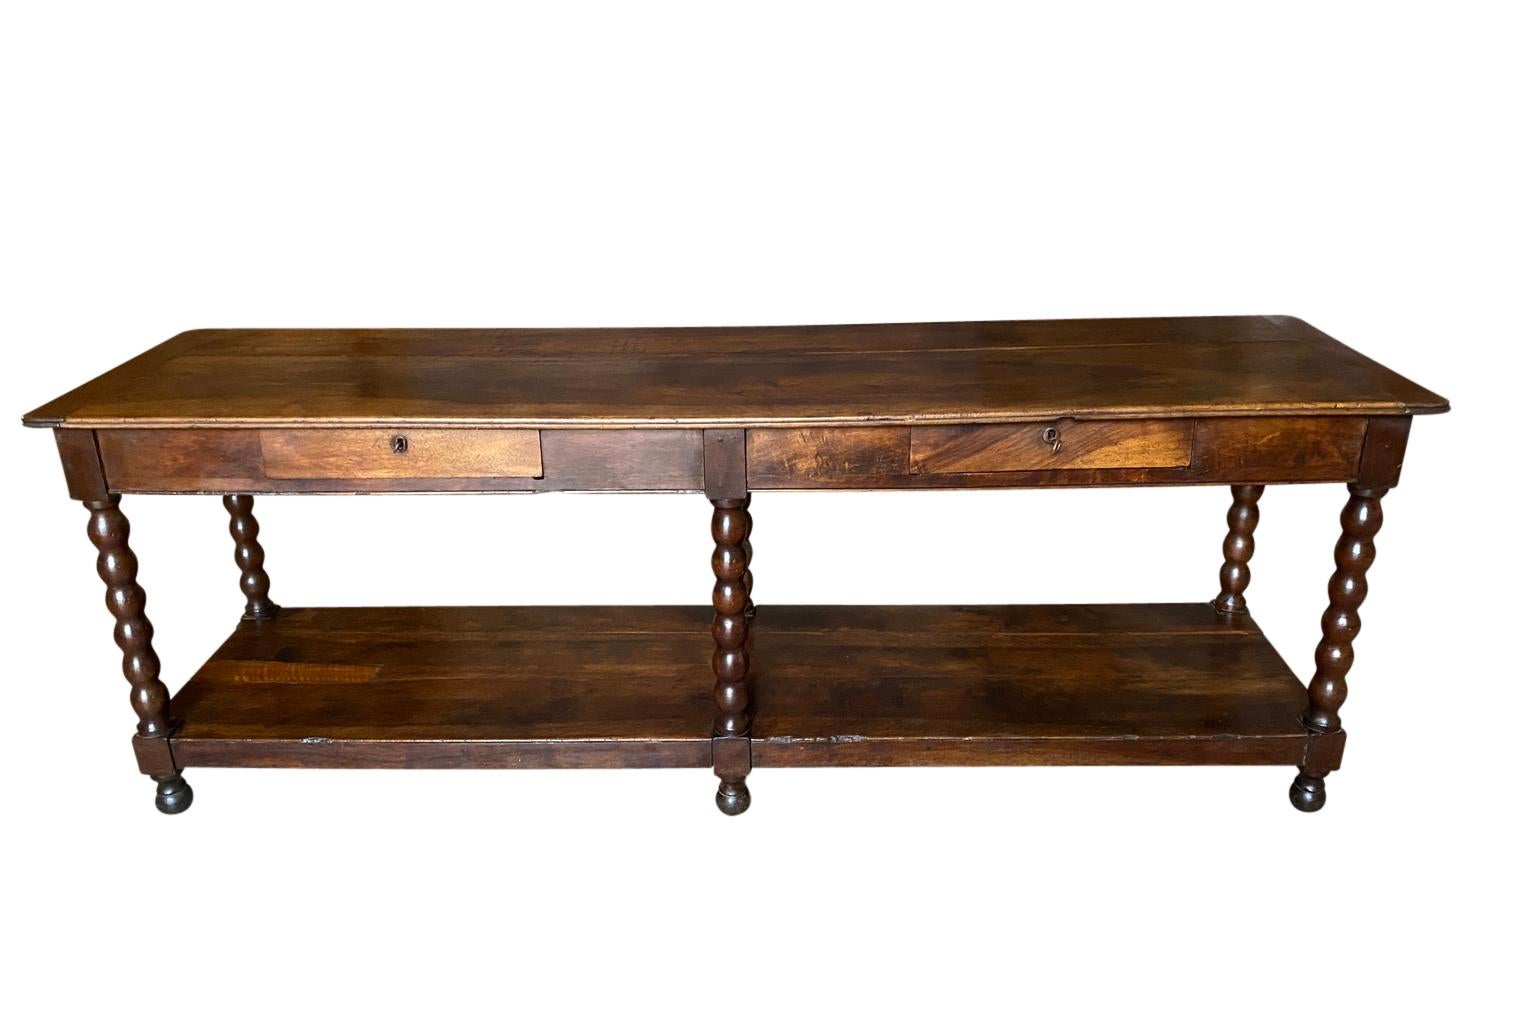 A very handsome Louis Philippe period Draper's Table from the South of France.  Wonderfully constructed from beautiful walnut with 2 drawers, nicely turned legs and a lower shelf.  A wonderful console table with terrific patina.